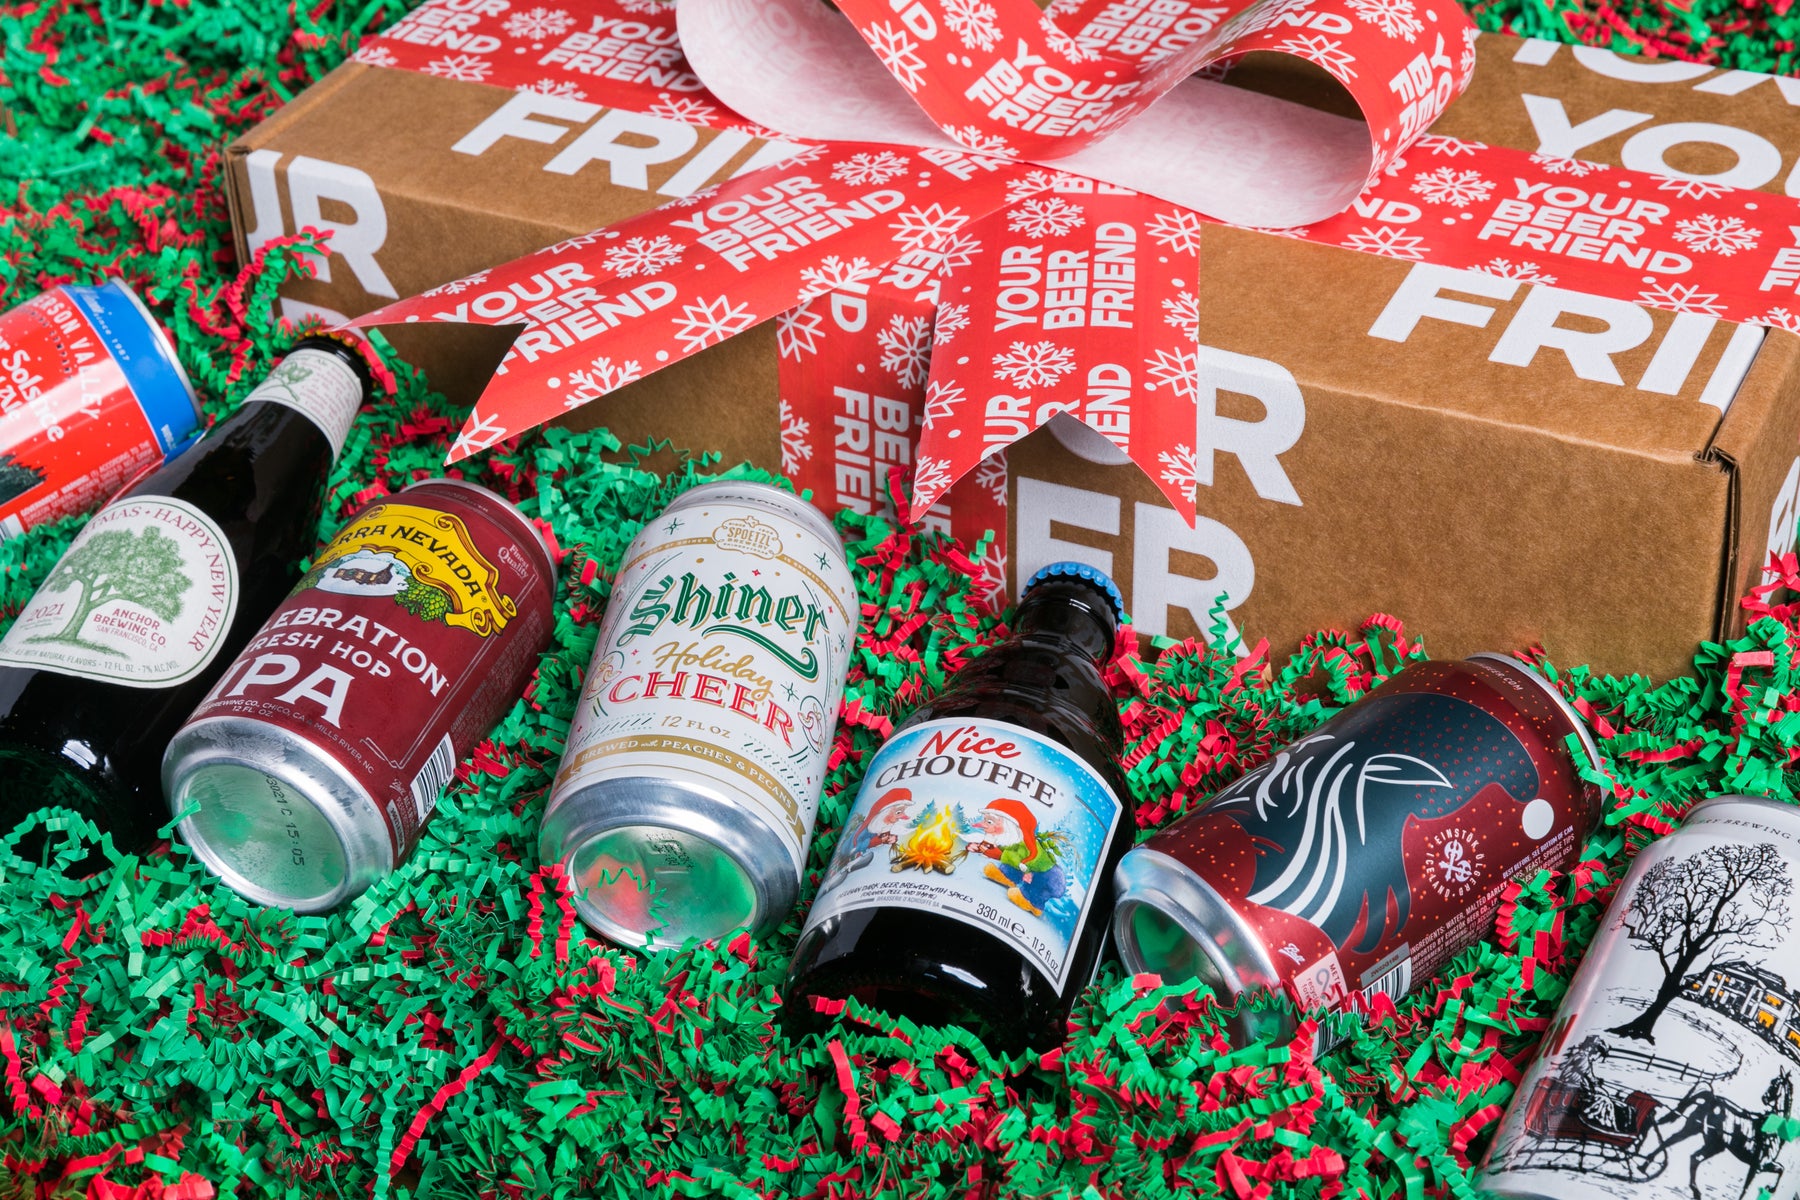 FRIDAY BEERS HOLIDAY MYSTERY BOX (10 ITEMS) – Friday Beers